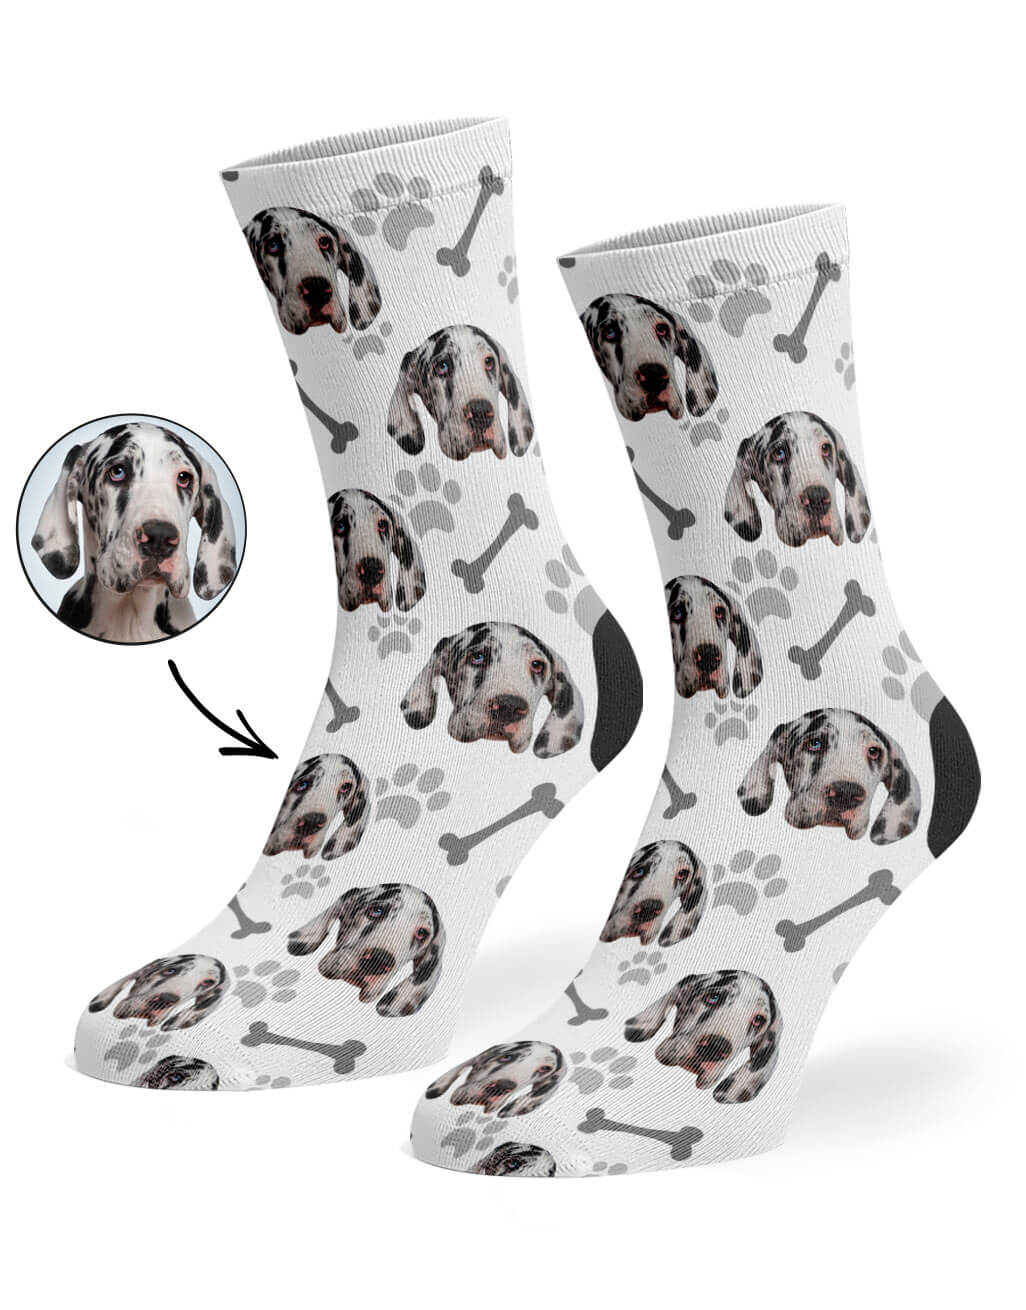 personalized socks with your dog on